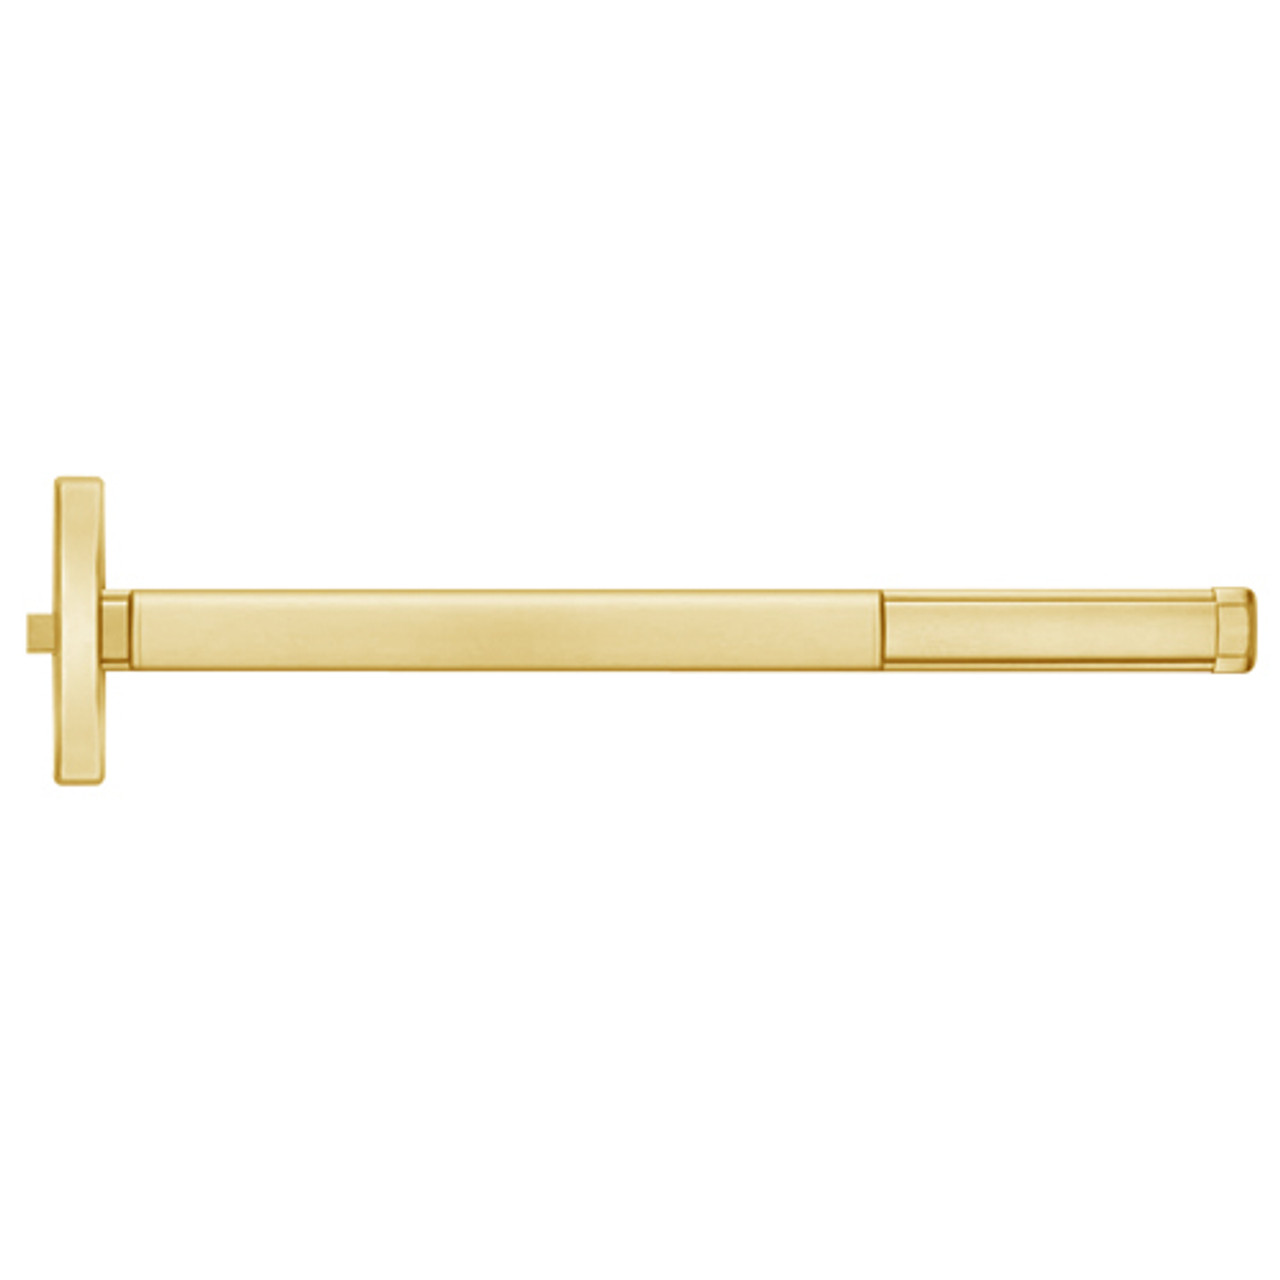 TSFL2401-605-48 PHI 2400 Series Fire Rated Apex Rim Exit Device with Touchbar Monitoring Switch Prepped for Cover Plate in Bright Brass Finish